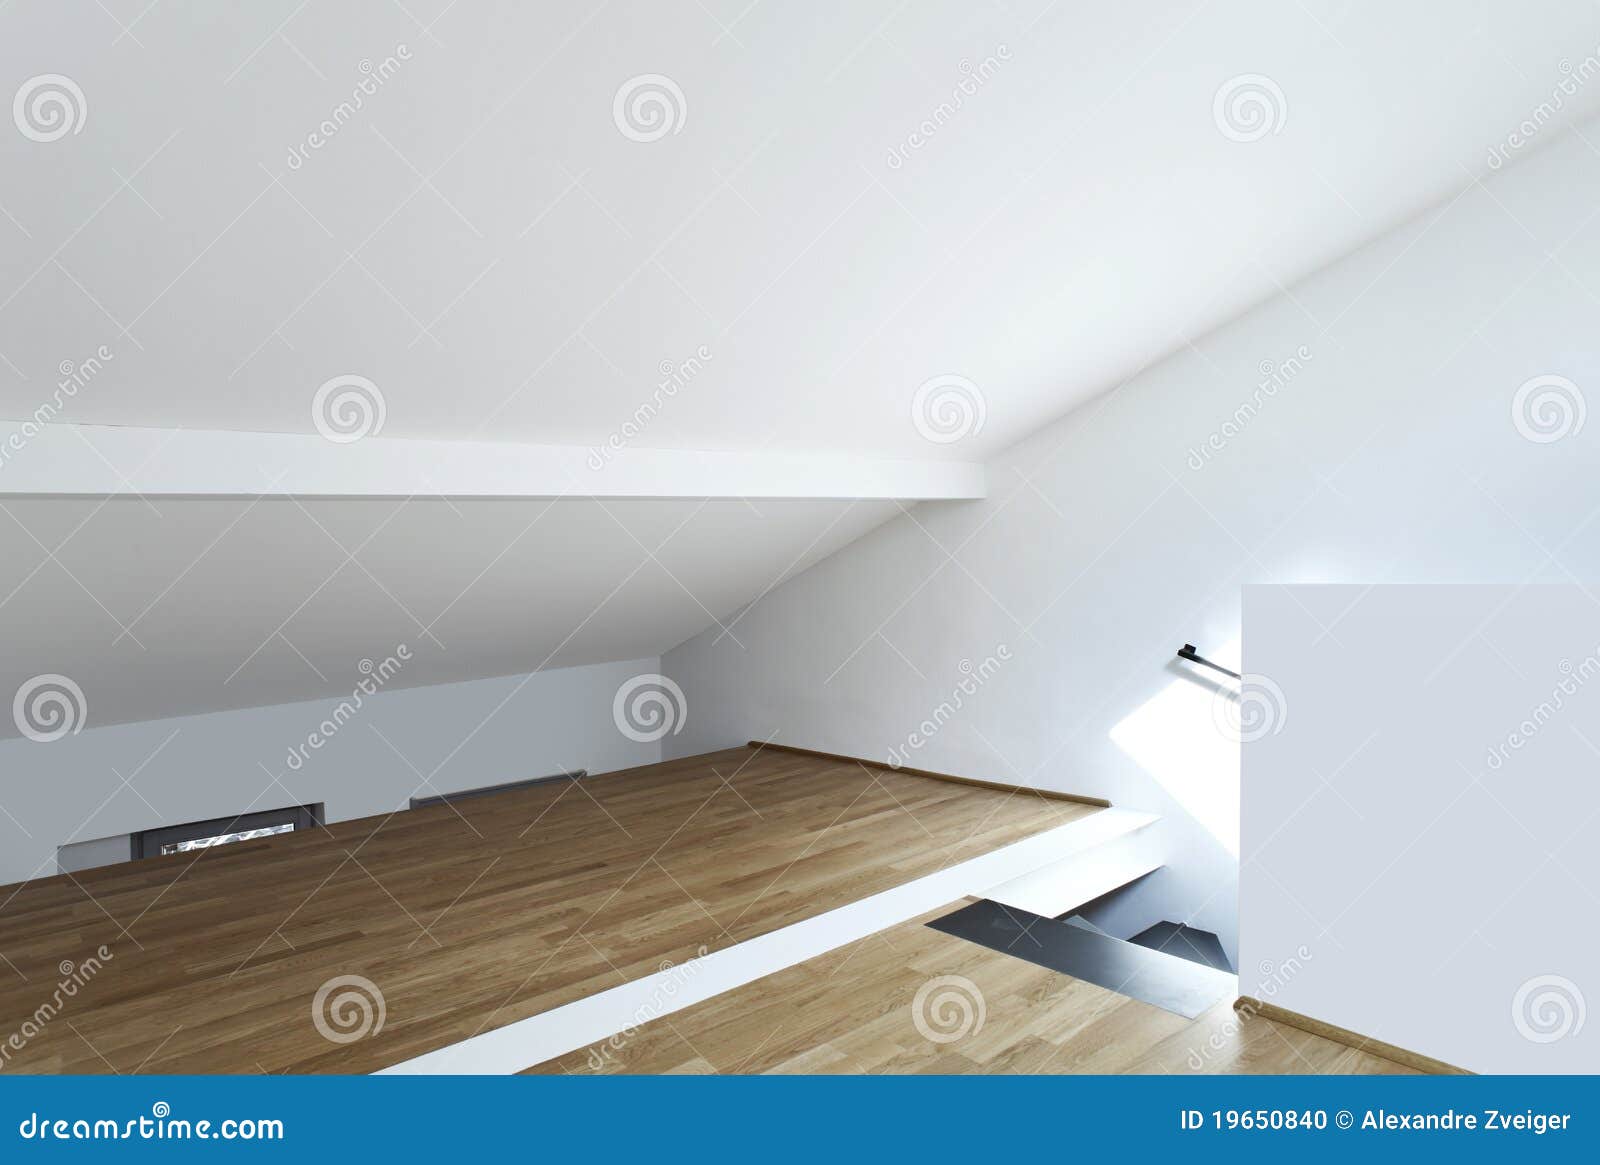 View of Room Under the Roof Stock Photo - Image of wall, open: 19650840